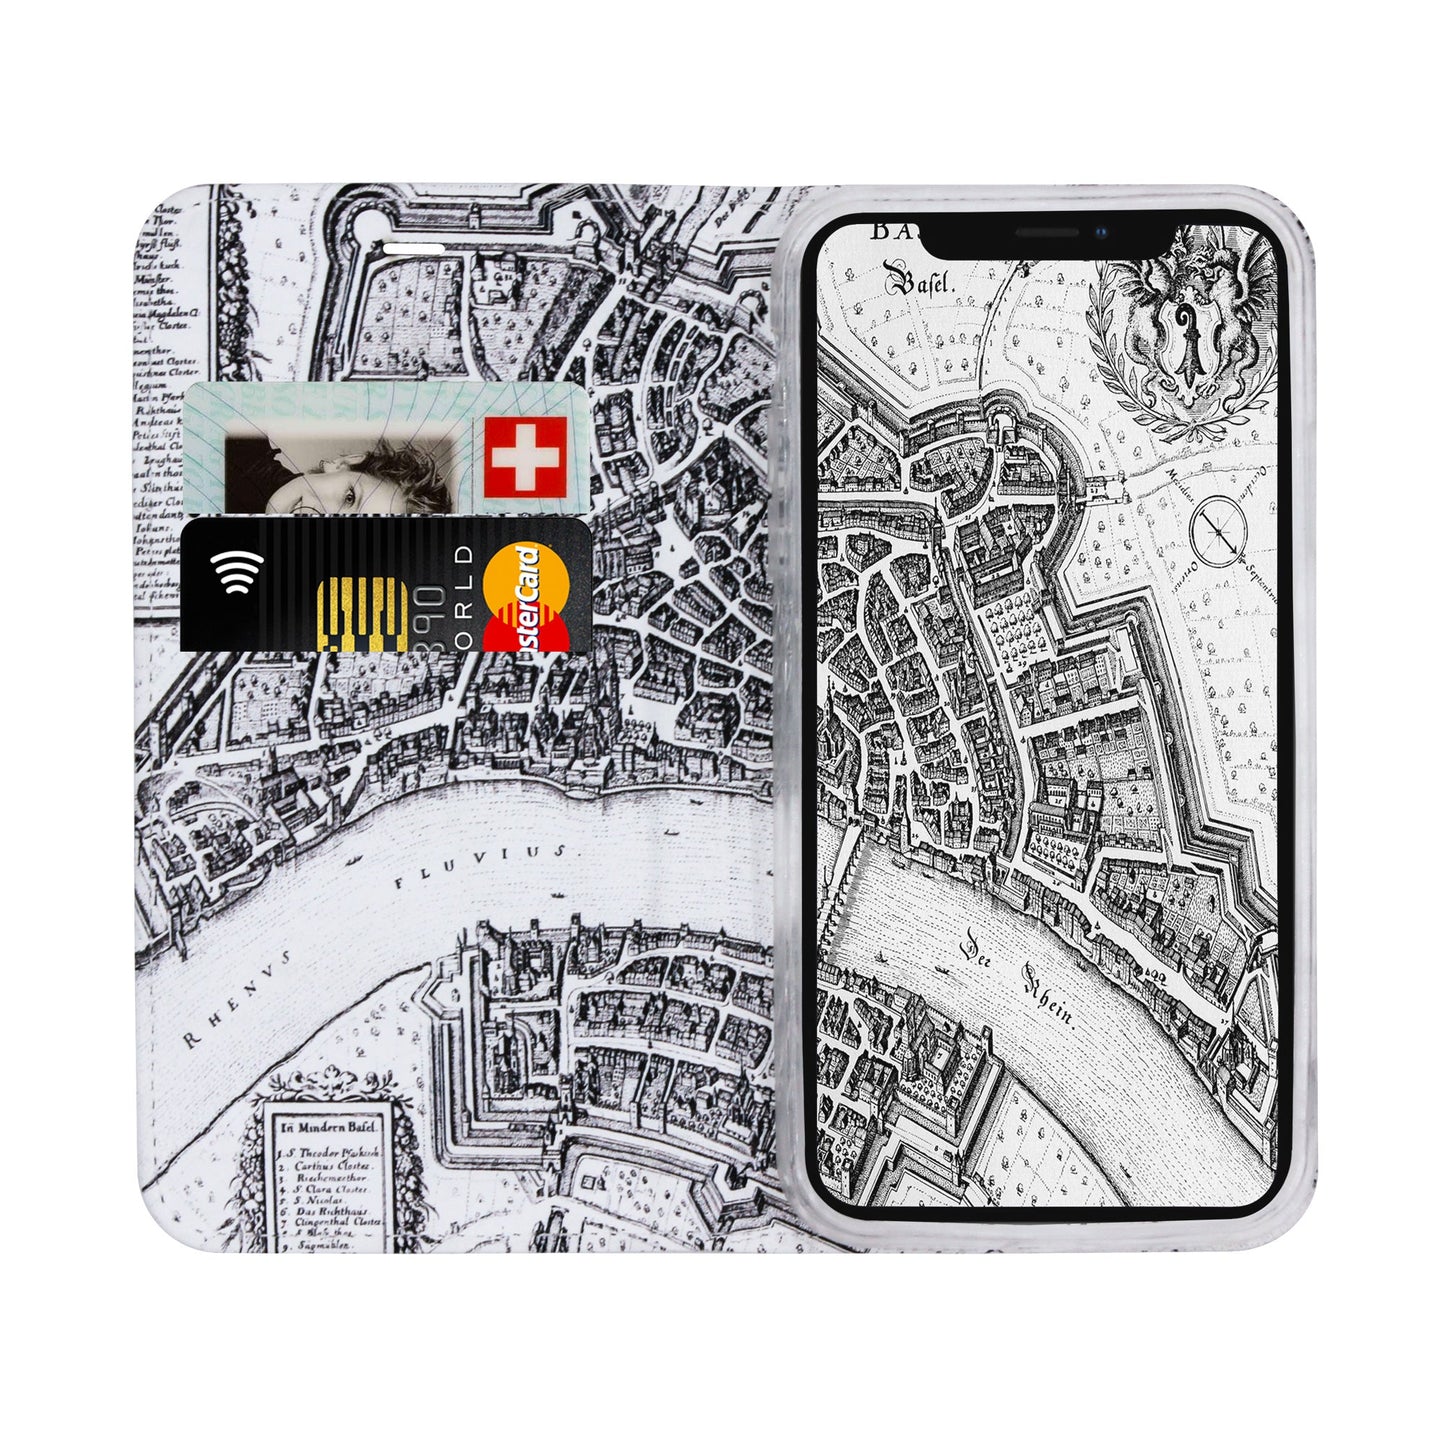 Basel Merian Panorama Case for iPhone XS Max